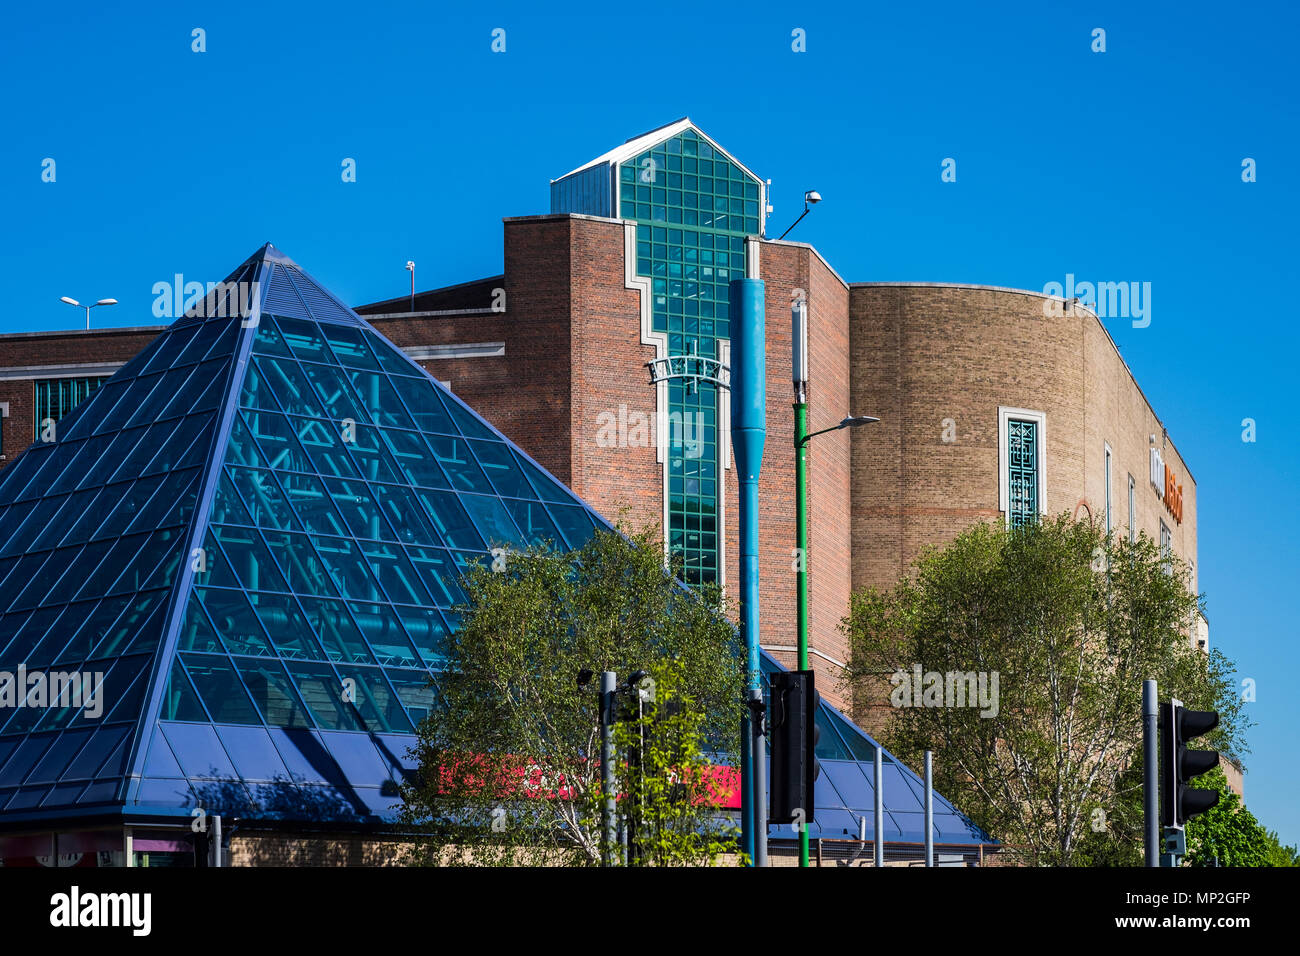 Intu shopping centre, Watford, Hertfordshire, Angleterre, Royaume-Uni Banque D'Images